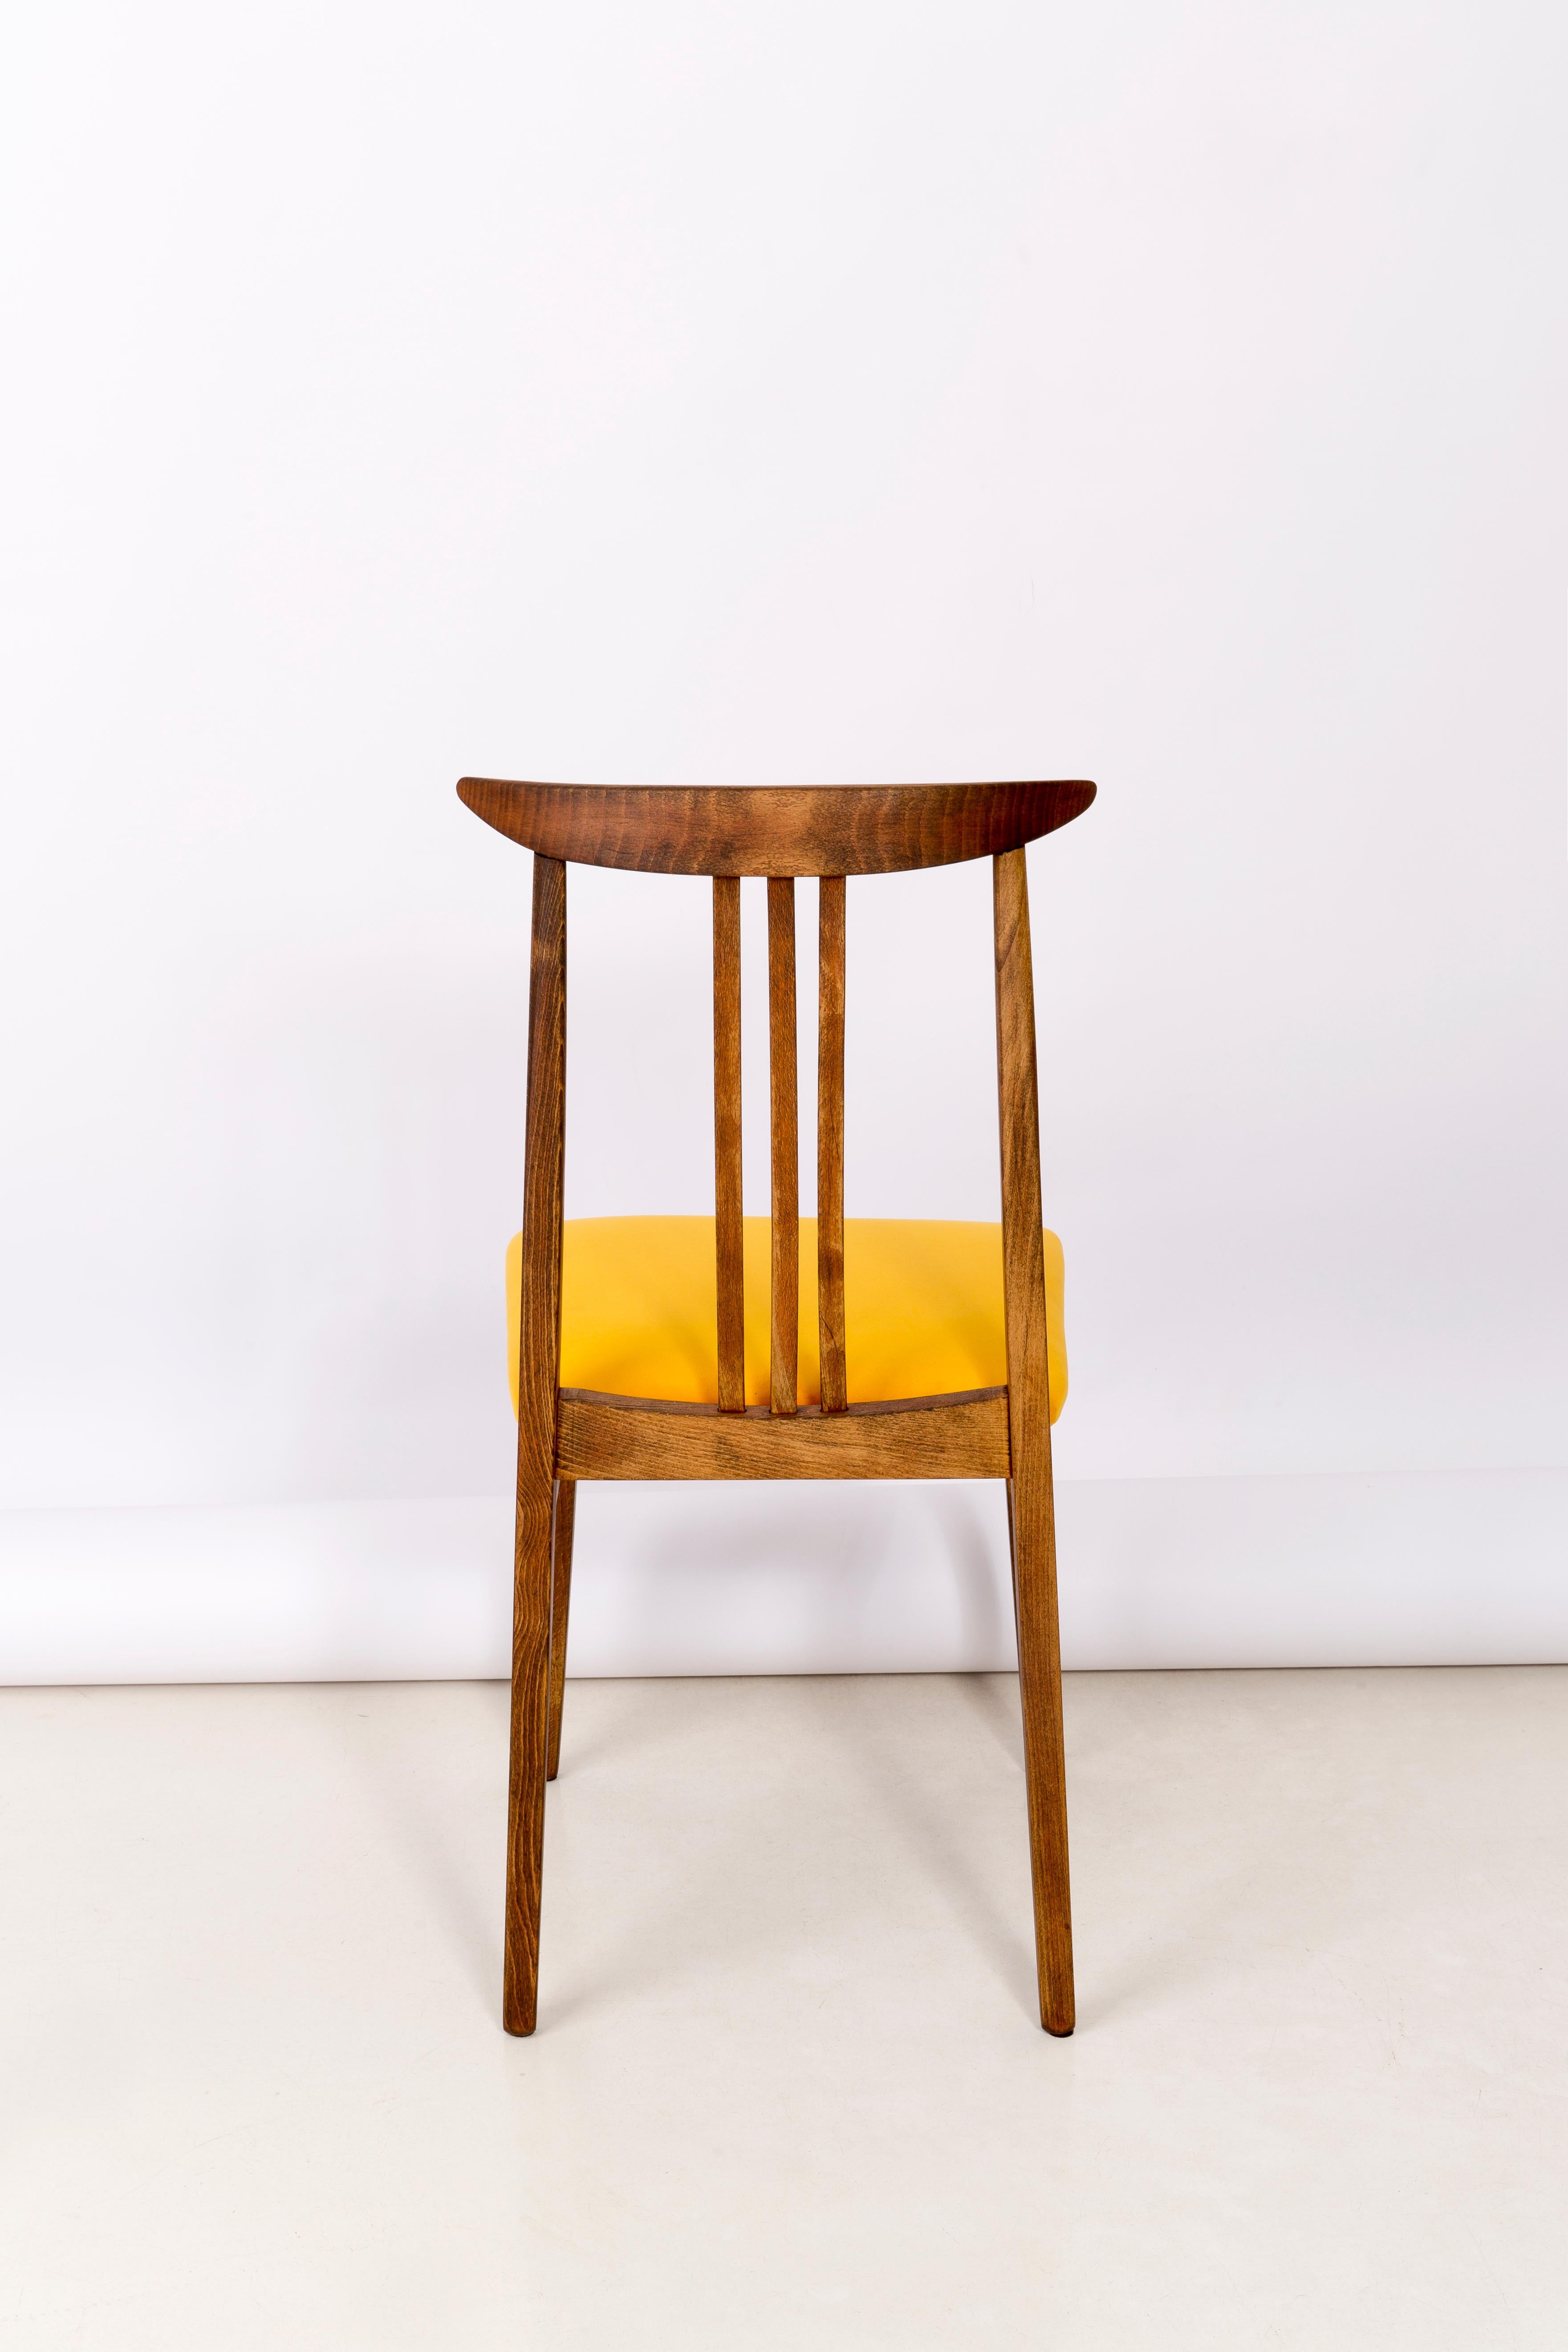 Set of Four Yellow Chairs, by Zielinski, Poland, 1960s For Sale 2